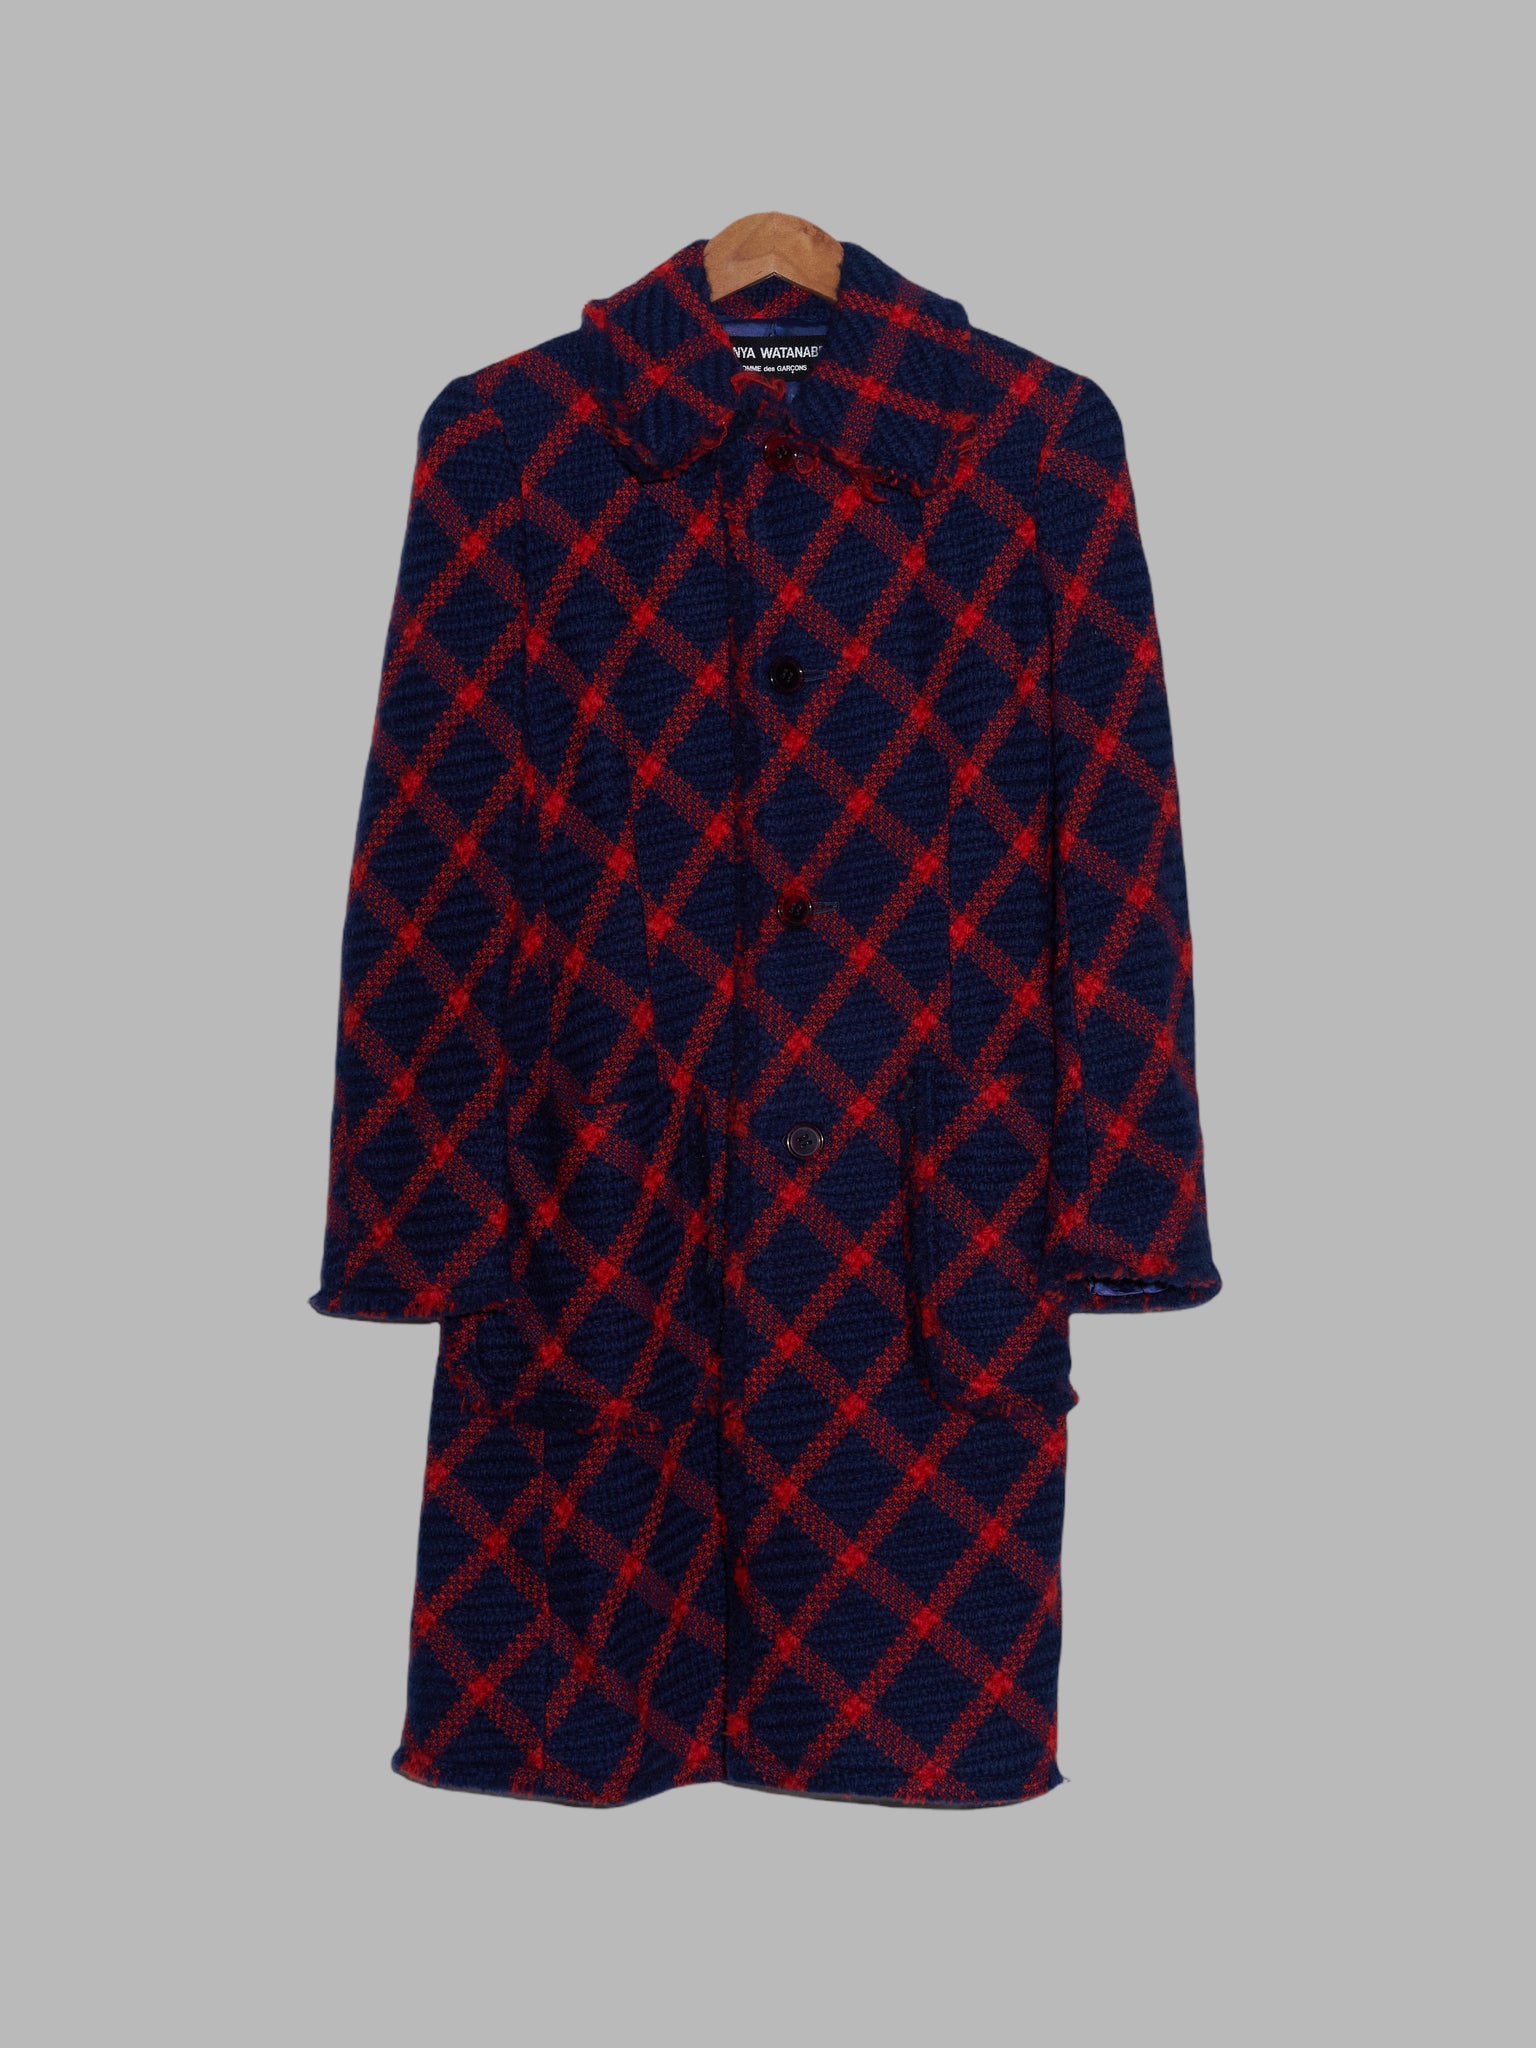 Junya Watanabe Comme des Garcons AW2001 navy red diagonal check wool coat - M S